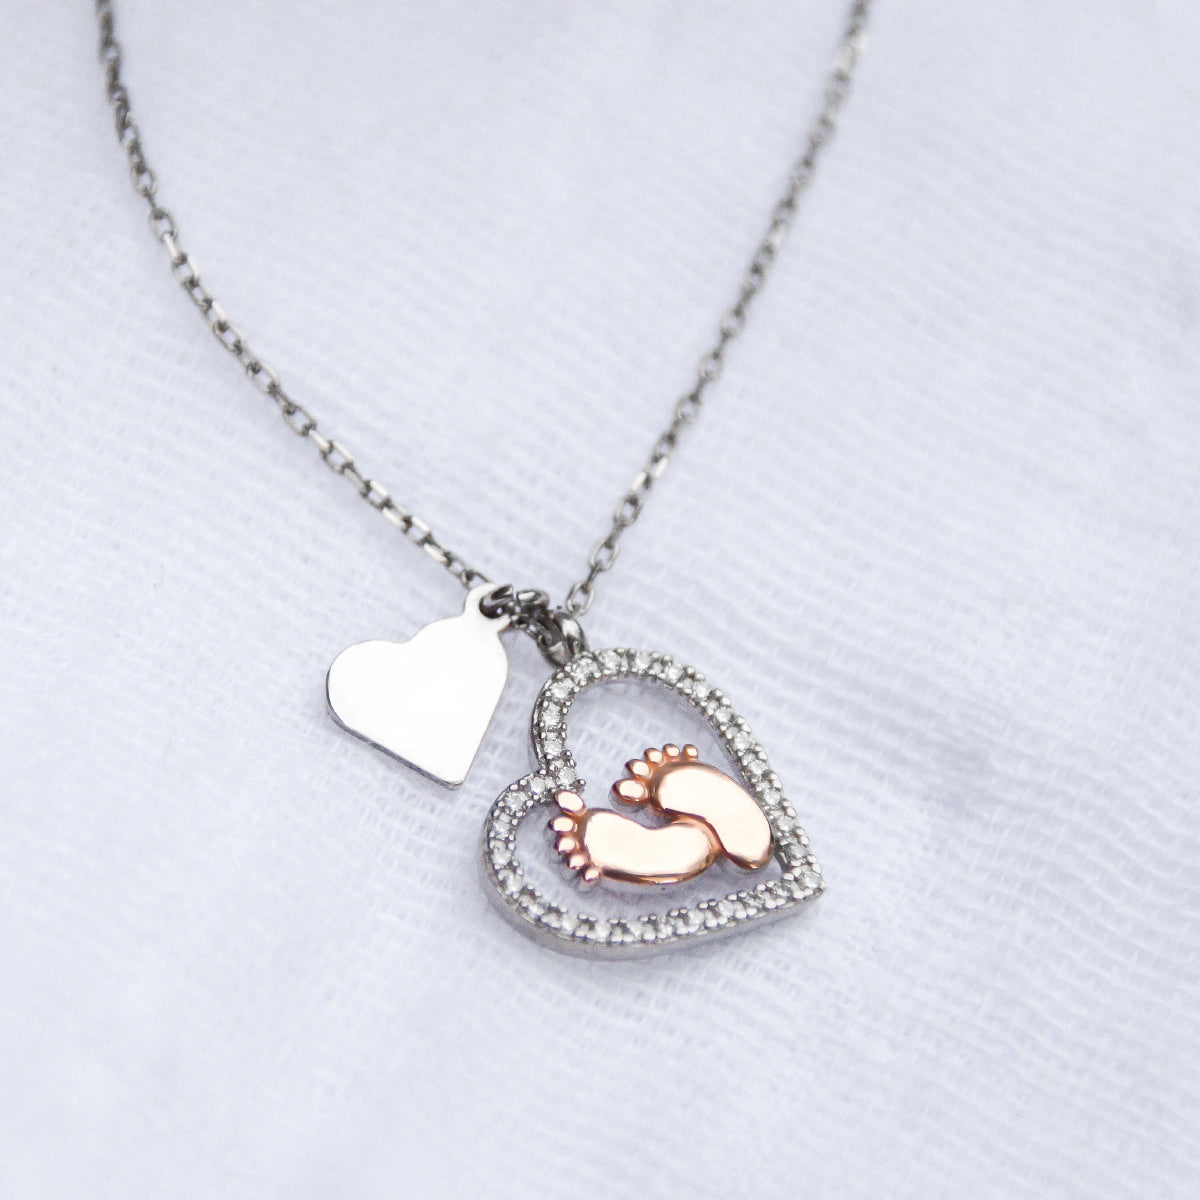 To My Mommy, I May Just Be a Bump - Baby Feet Heart Pendant Necklace Gift Set